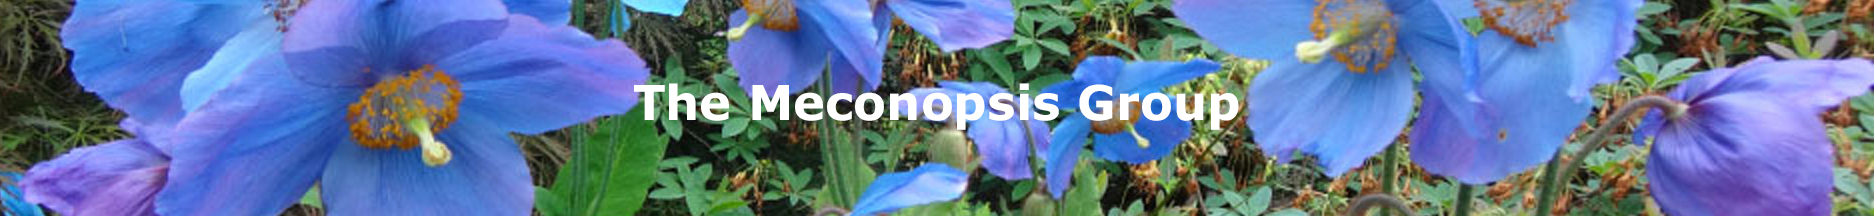 The Meconopsis Group